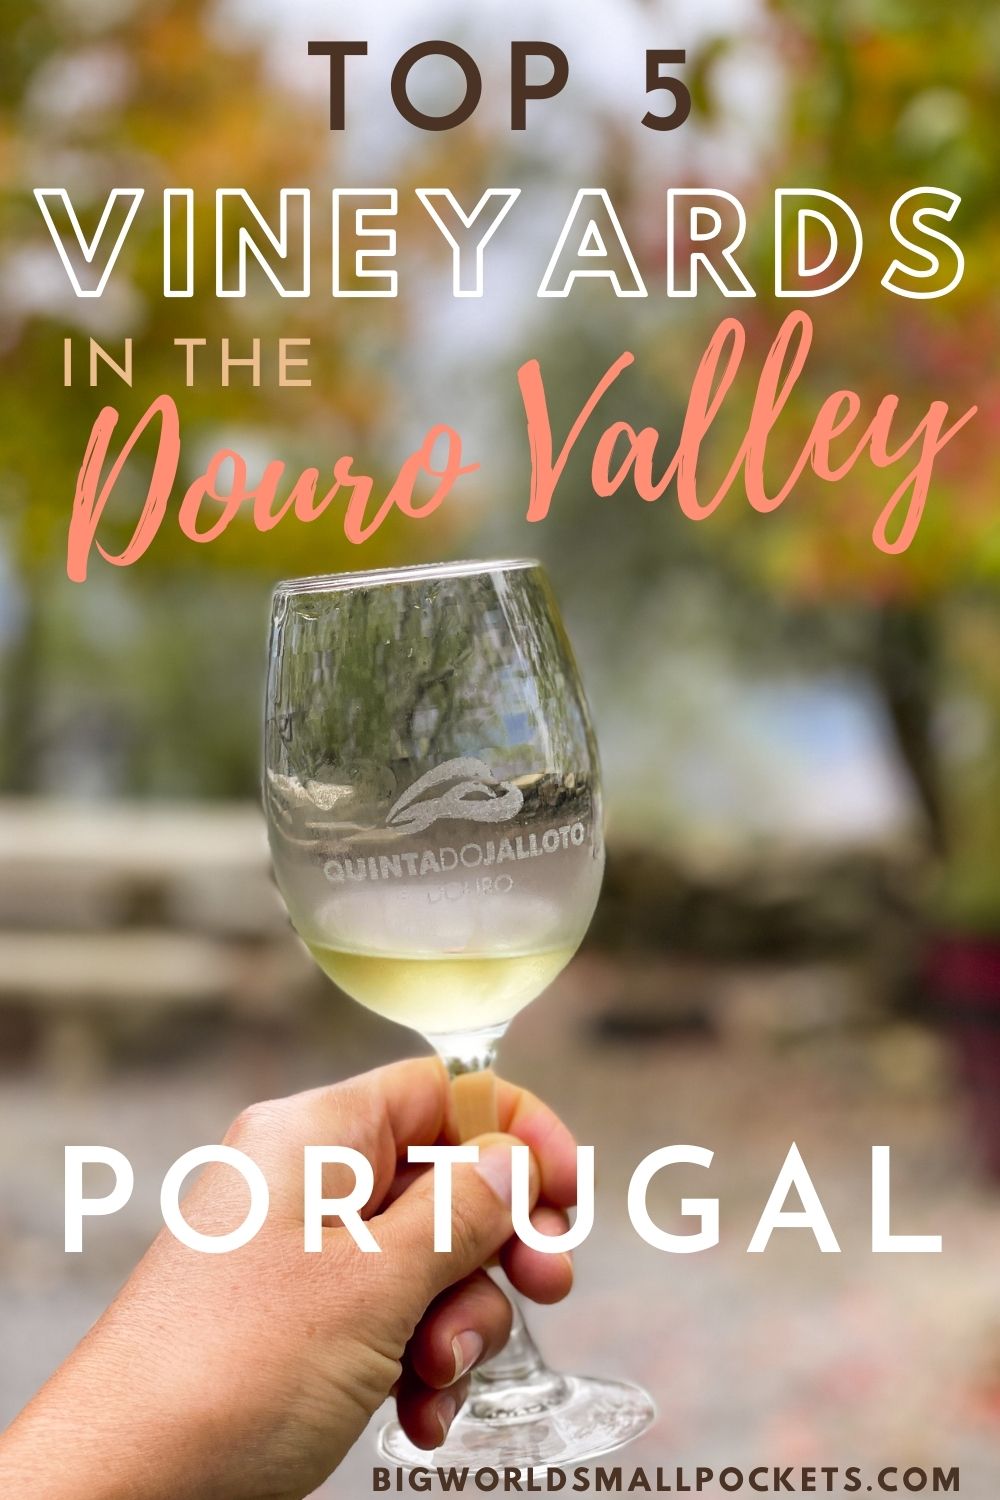 Top 5 Vineyards in Portugal's Douro Valley